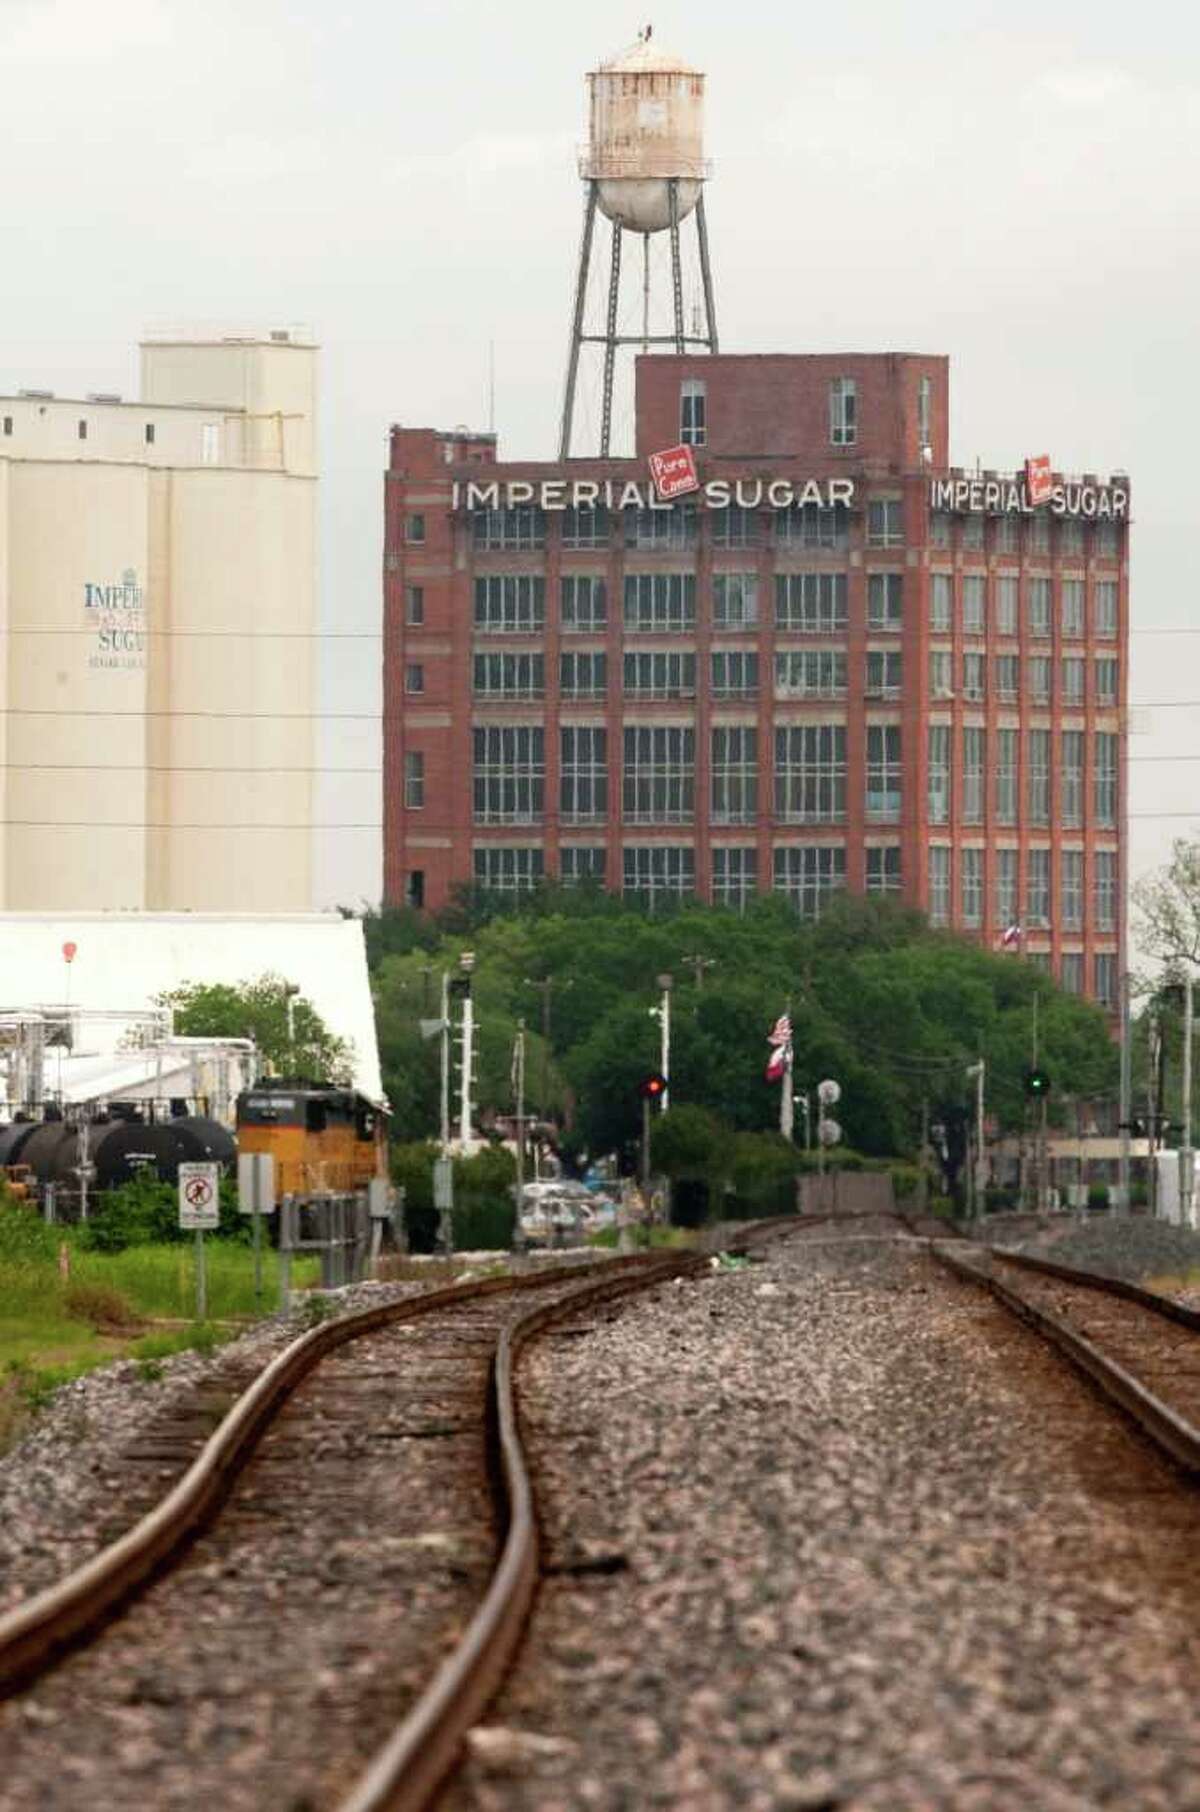 The Imperial Sugar factory on Wednesday April 4, 2012 in Sugarland, TX.